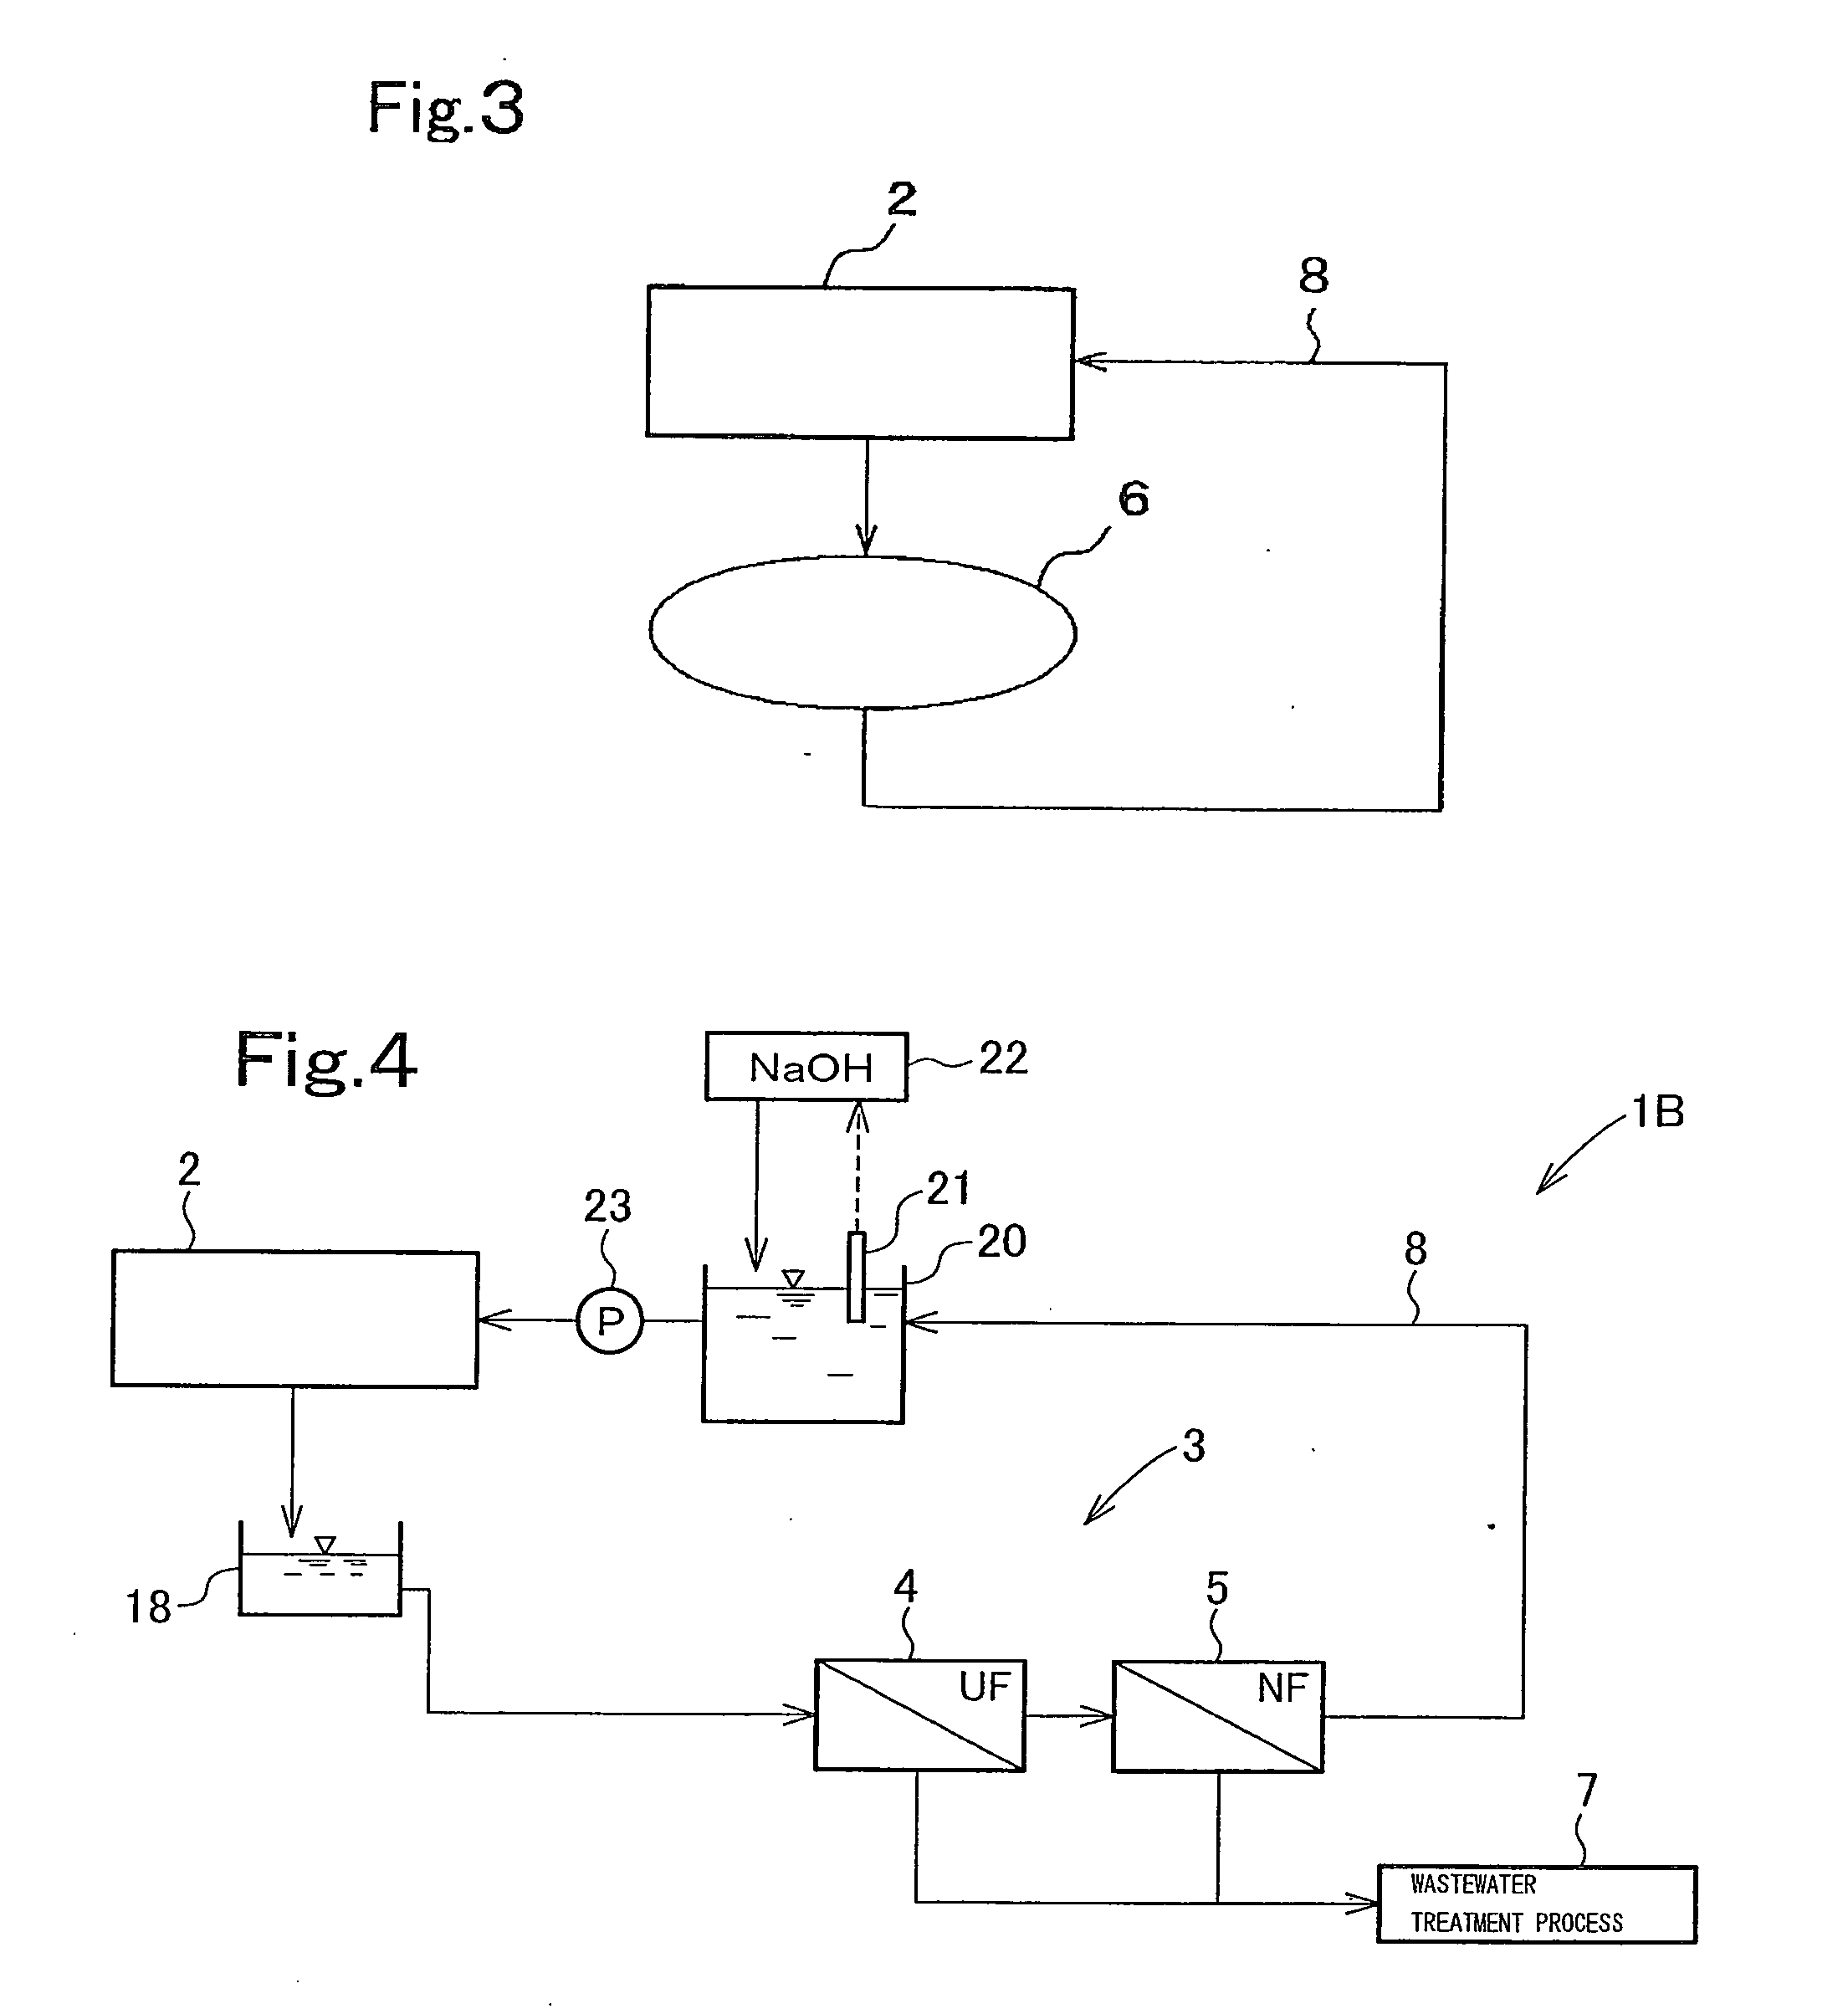 Apparatus and method for treating etching solution